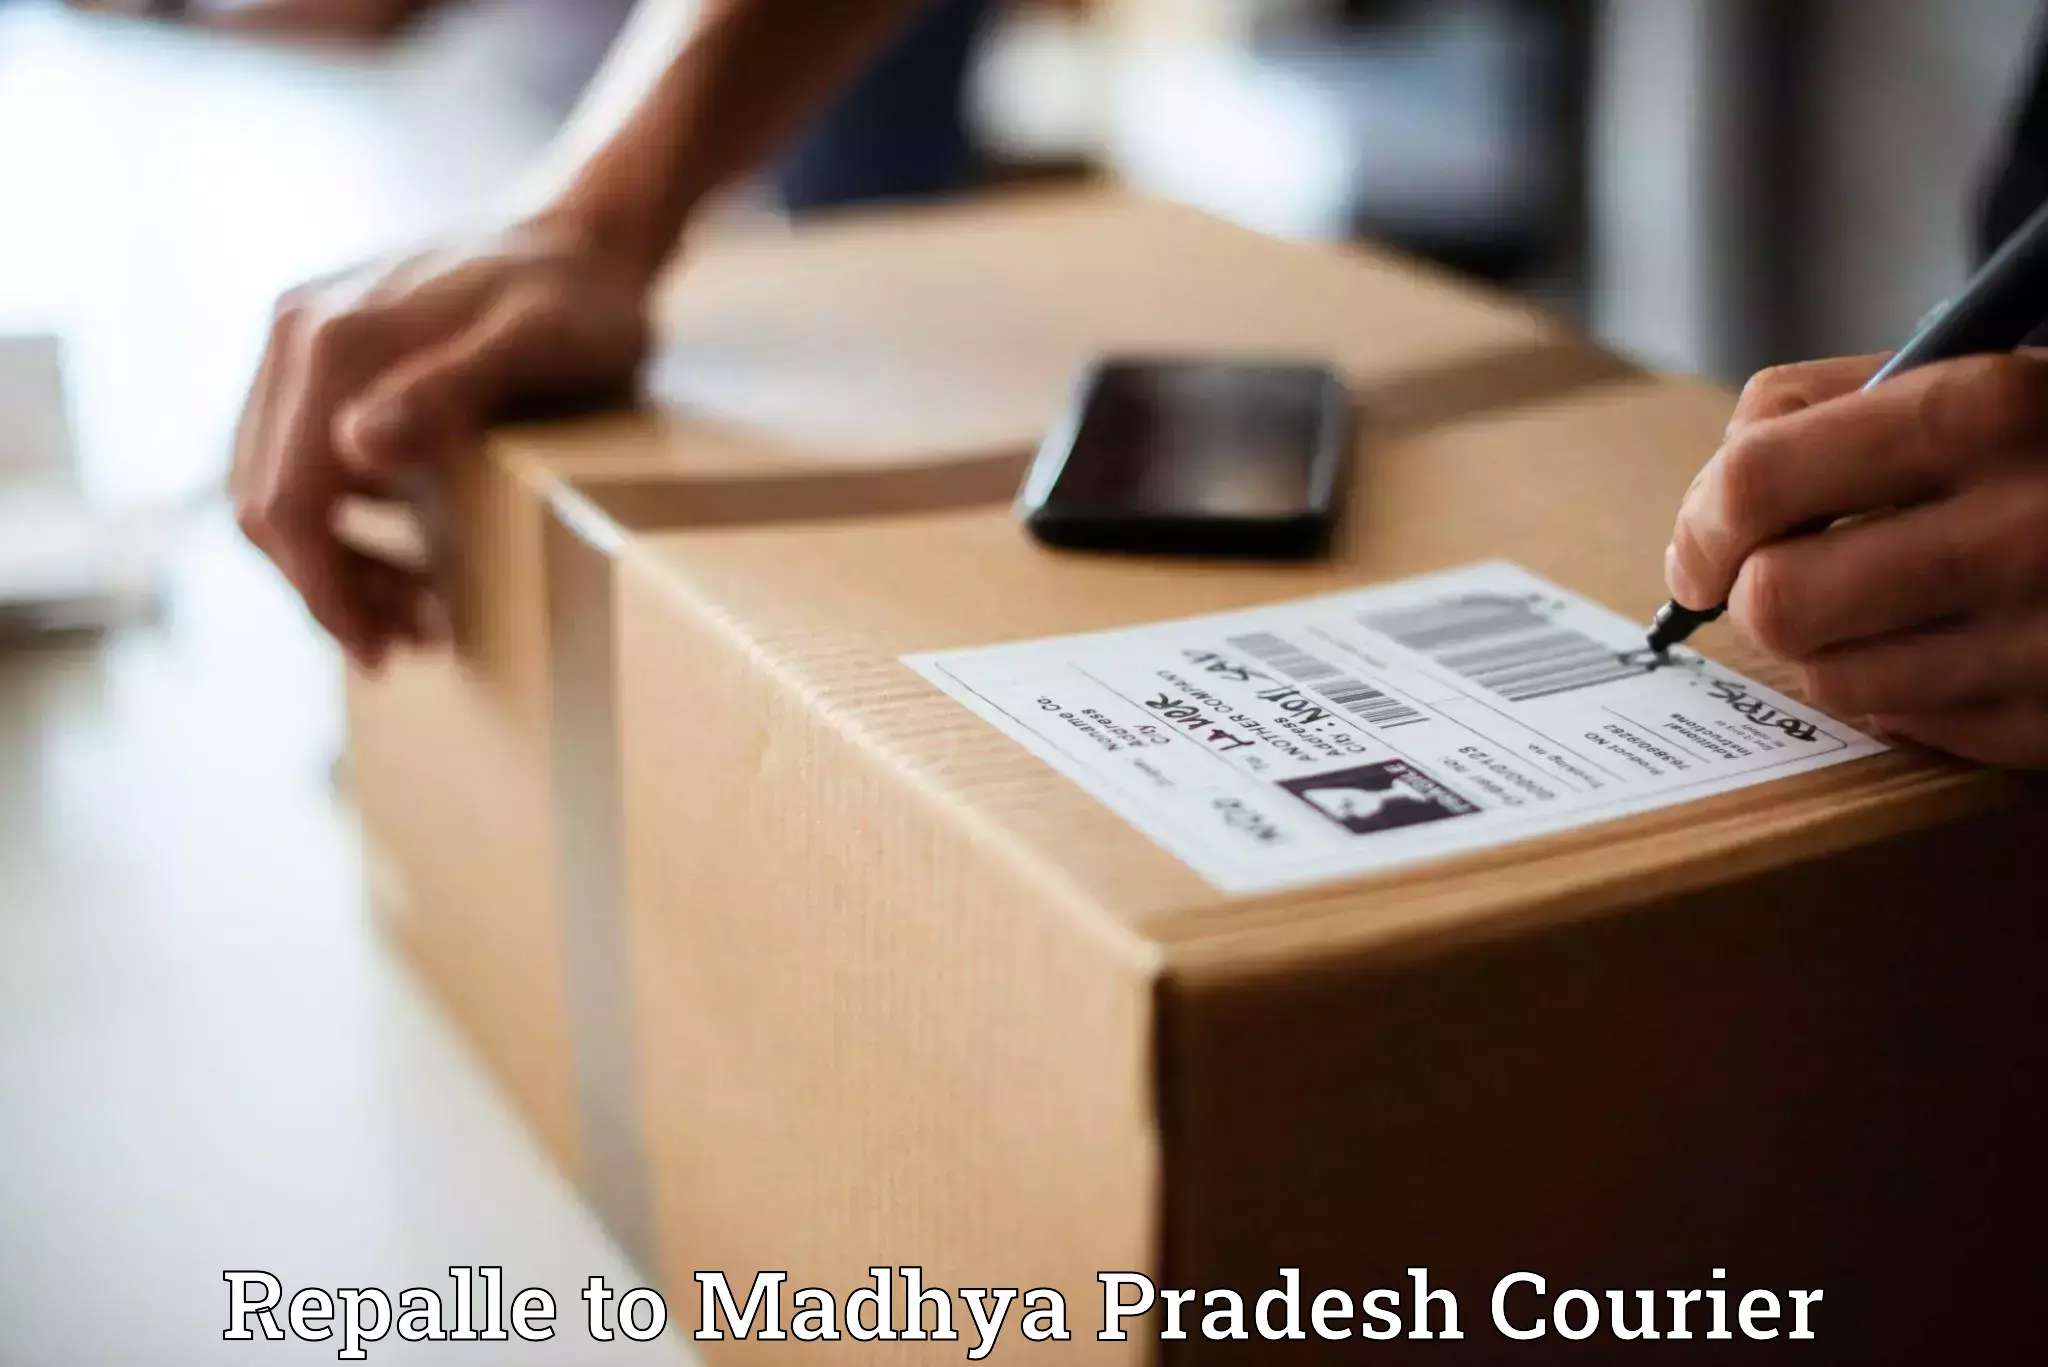 Courier tracking online Repalle to Maksudangarh